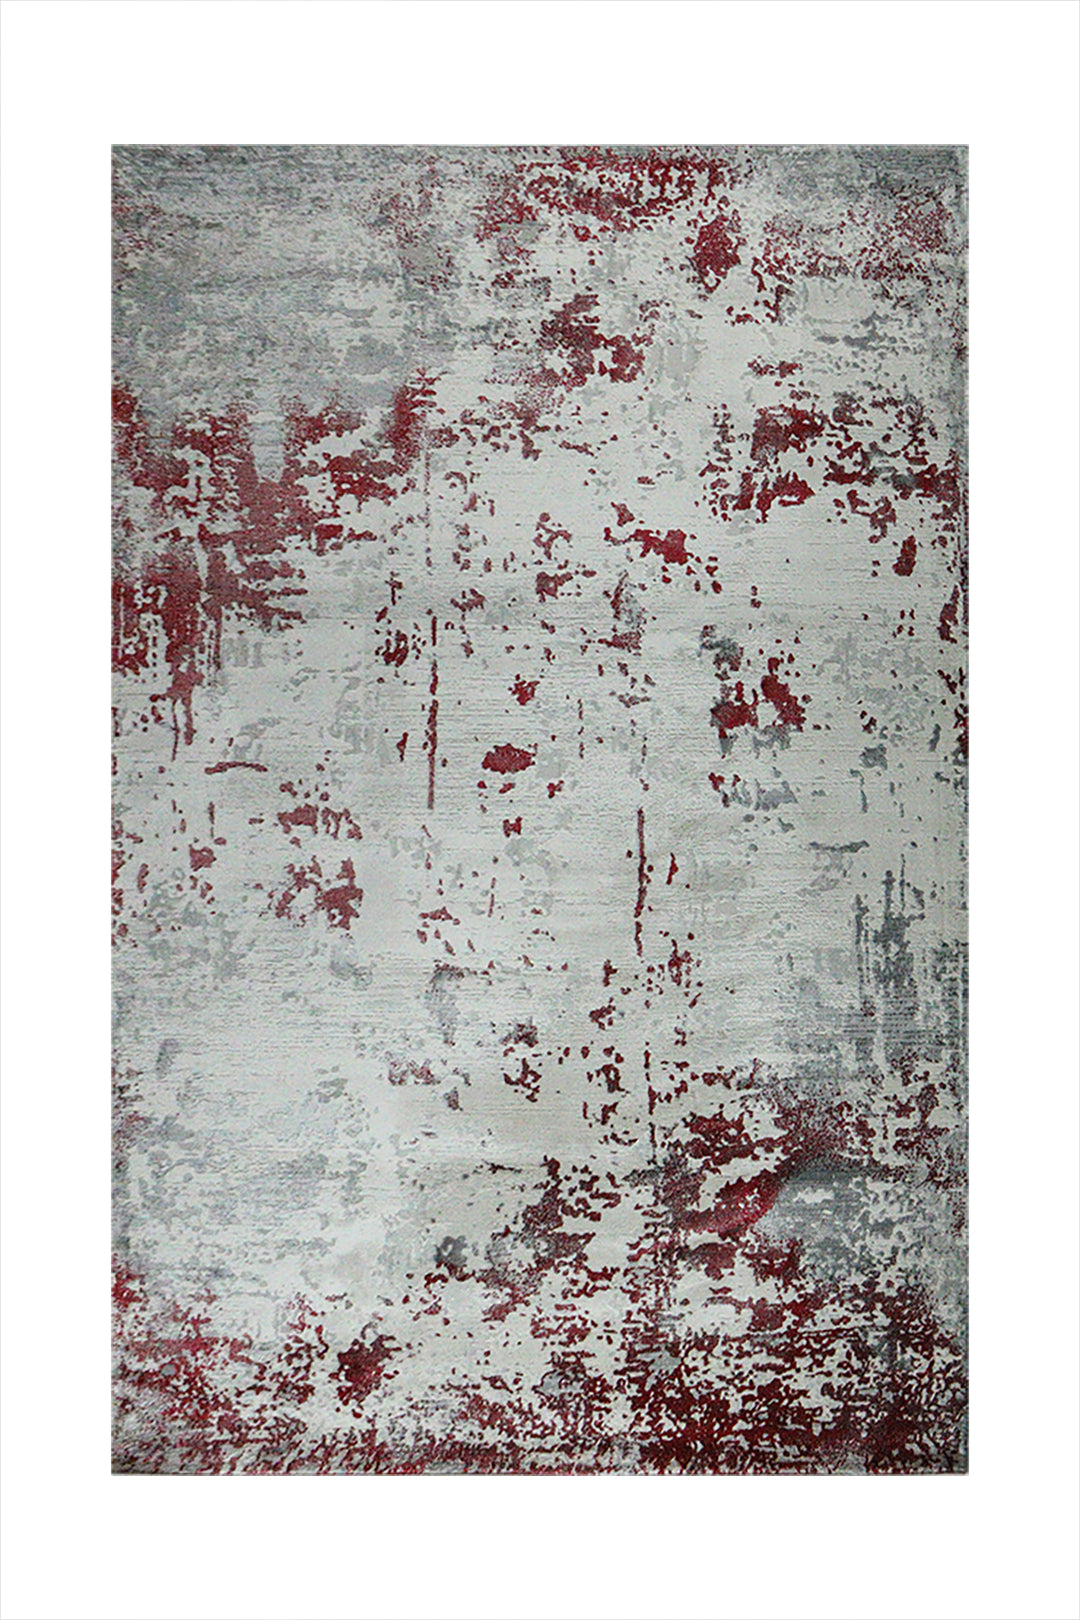 Turkish Modern Festival 1 Rug - 5.2 x 7.5 FT - Red - Sleek and Minimalist for Chic Interiors